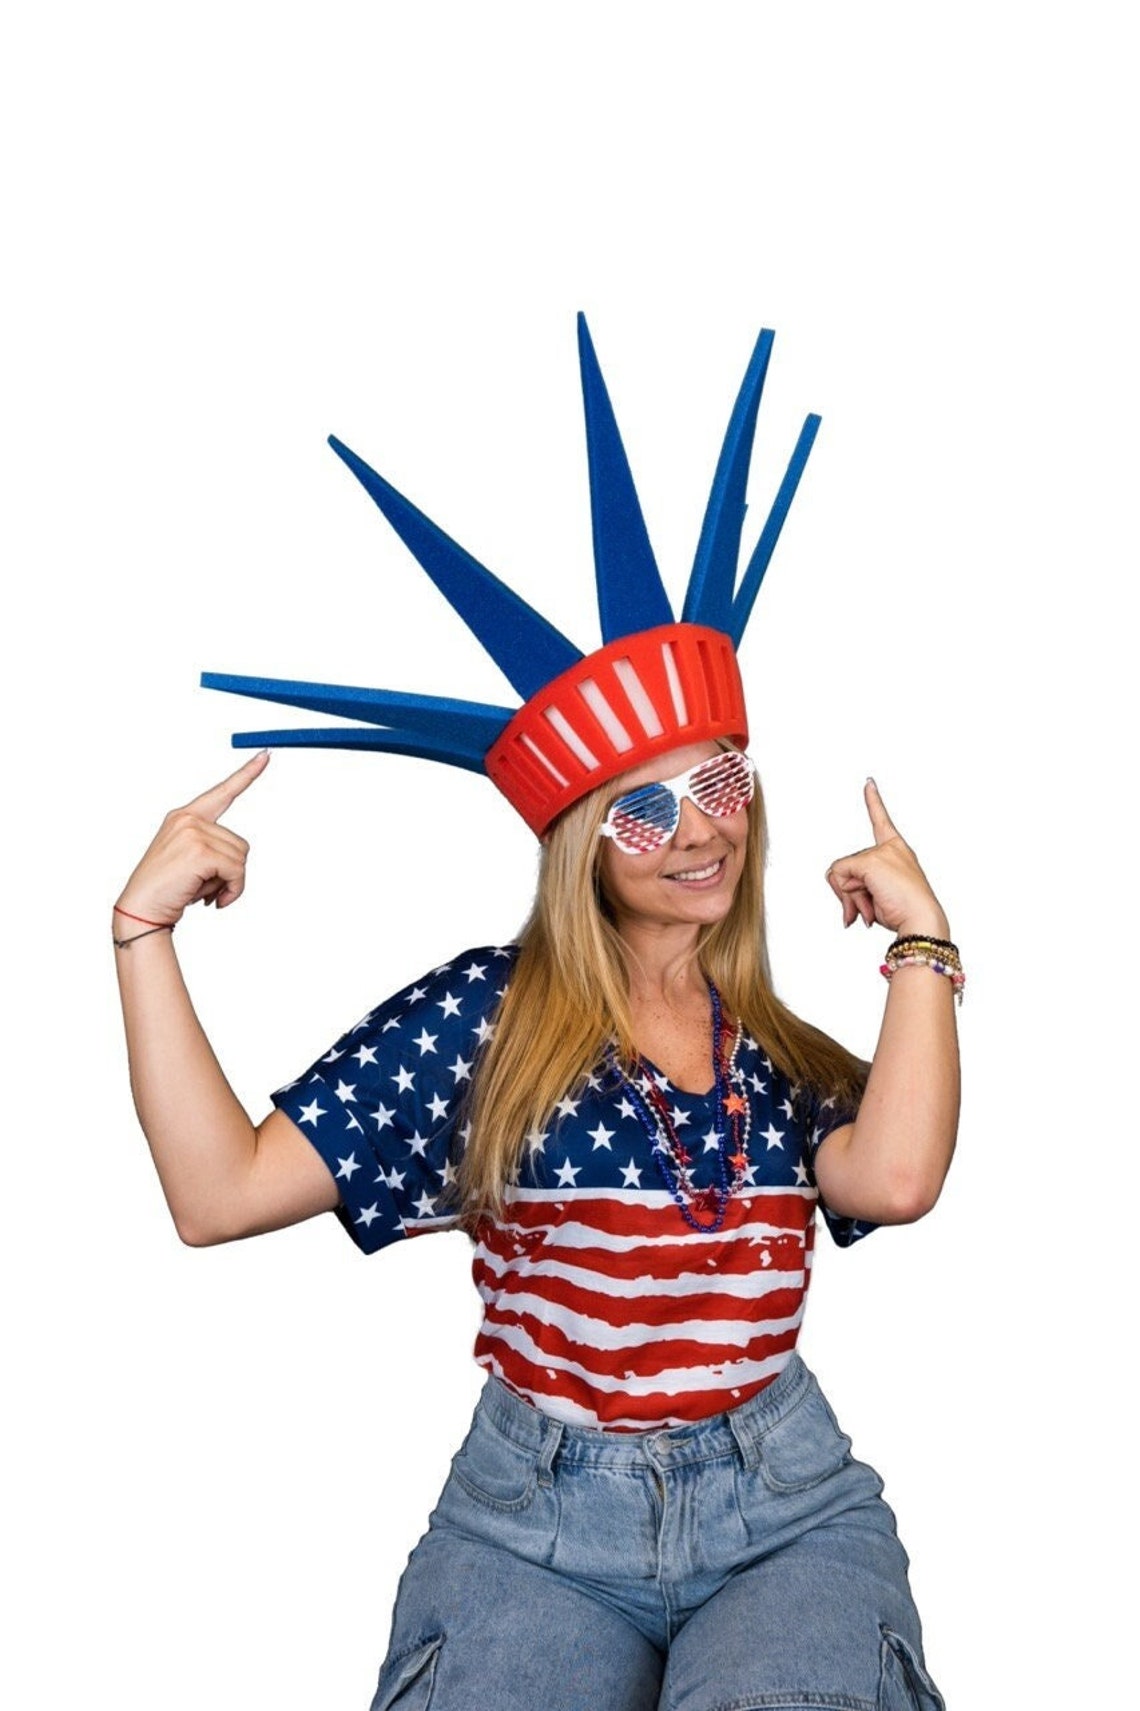 Foam Party Hats: Funny Silly Men & Women Patriotic USA Top - Etsy